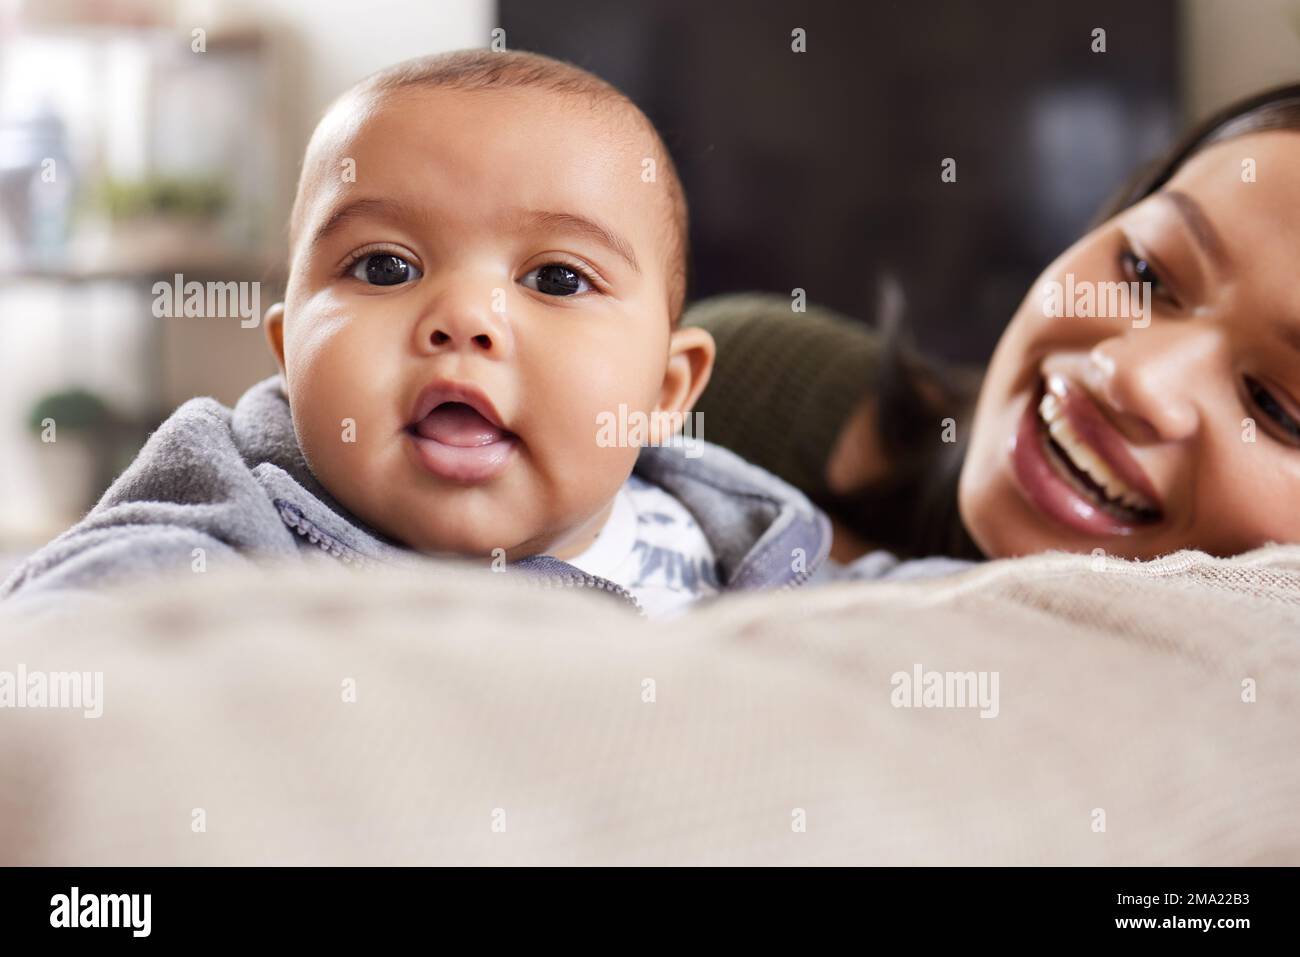 Having a baby is like falling in love again. a young woman relaxing with her adorable baby on the sofa at home. Stock Photo